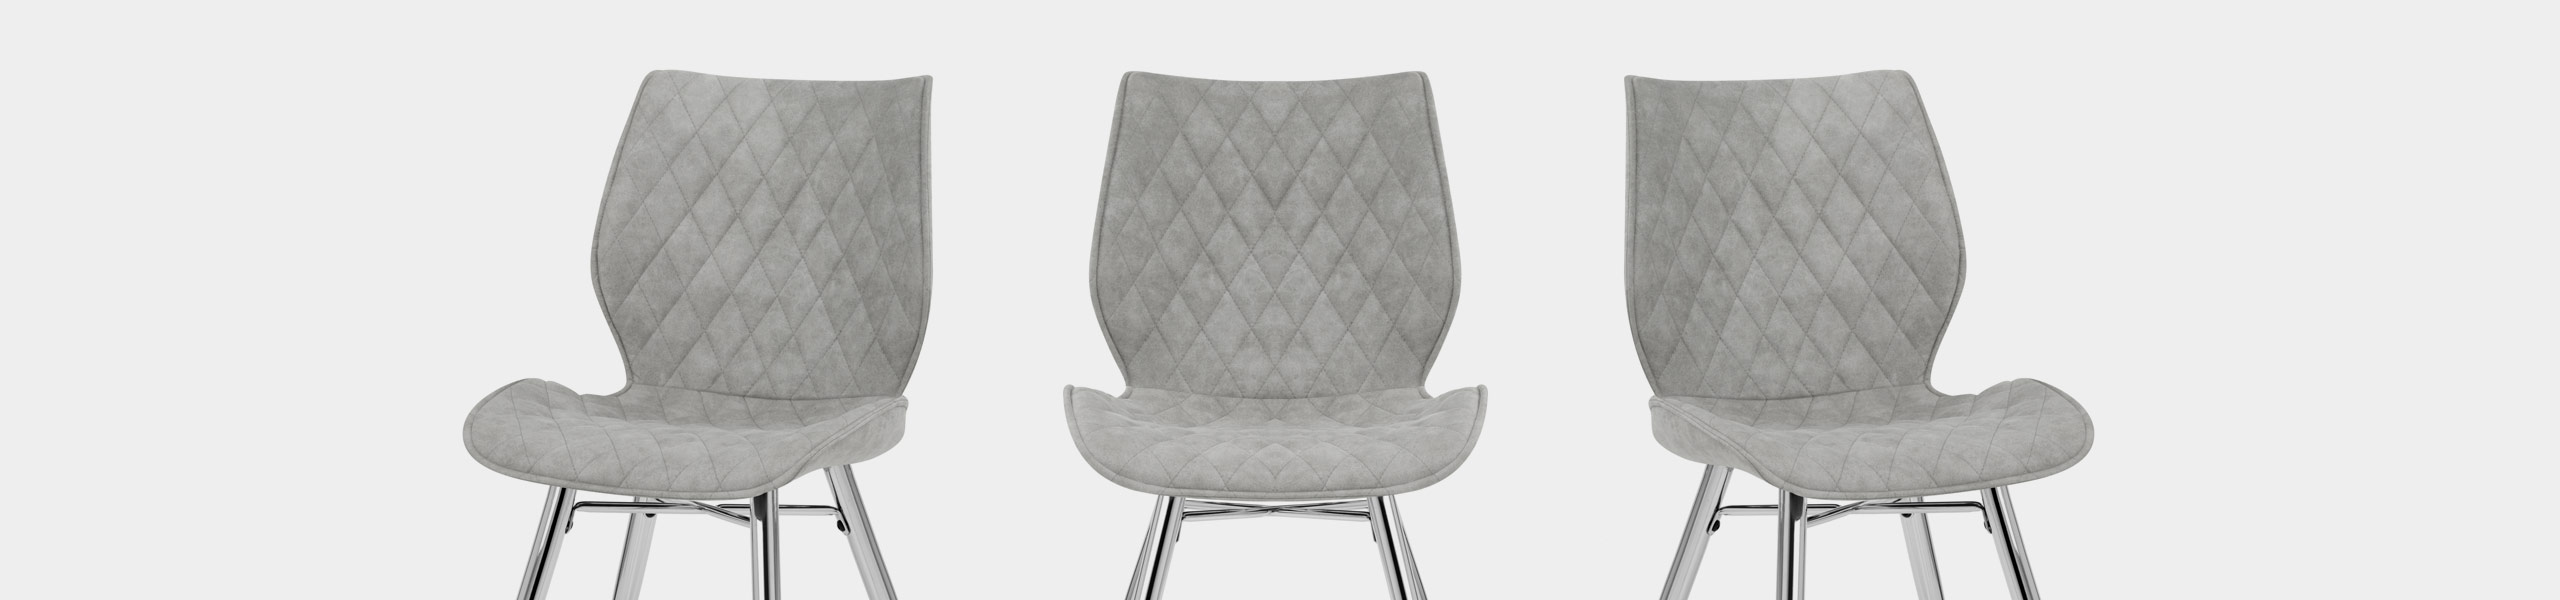 Lux Dining Chair Antique Grey Video Banner